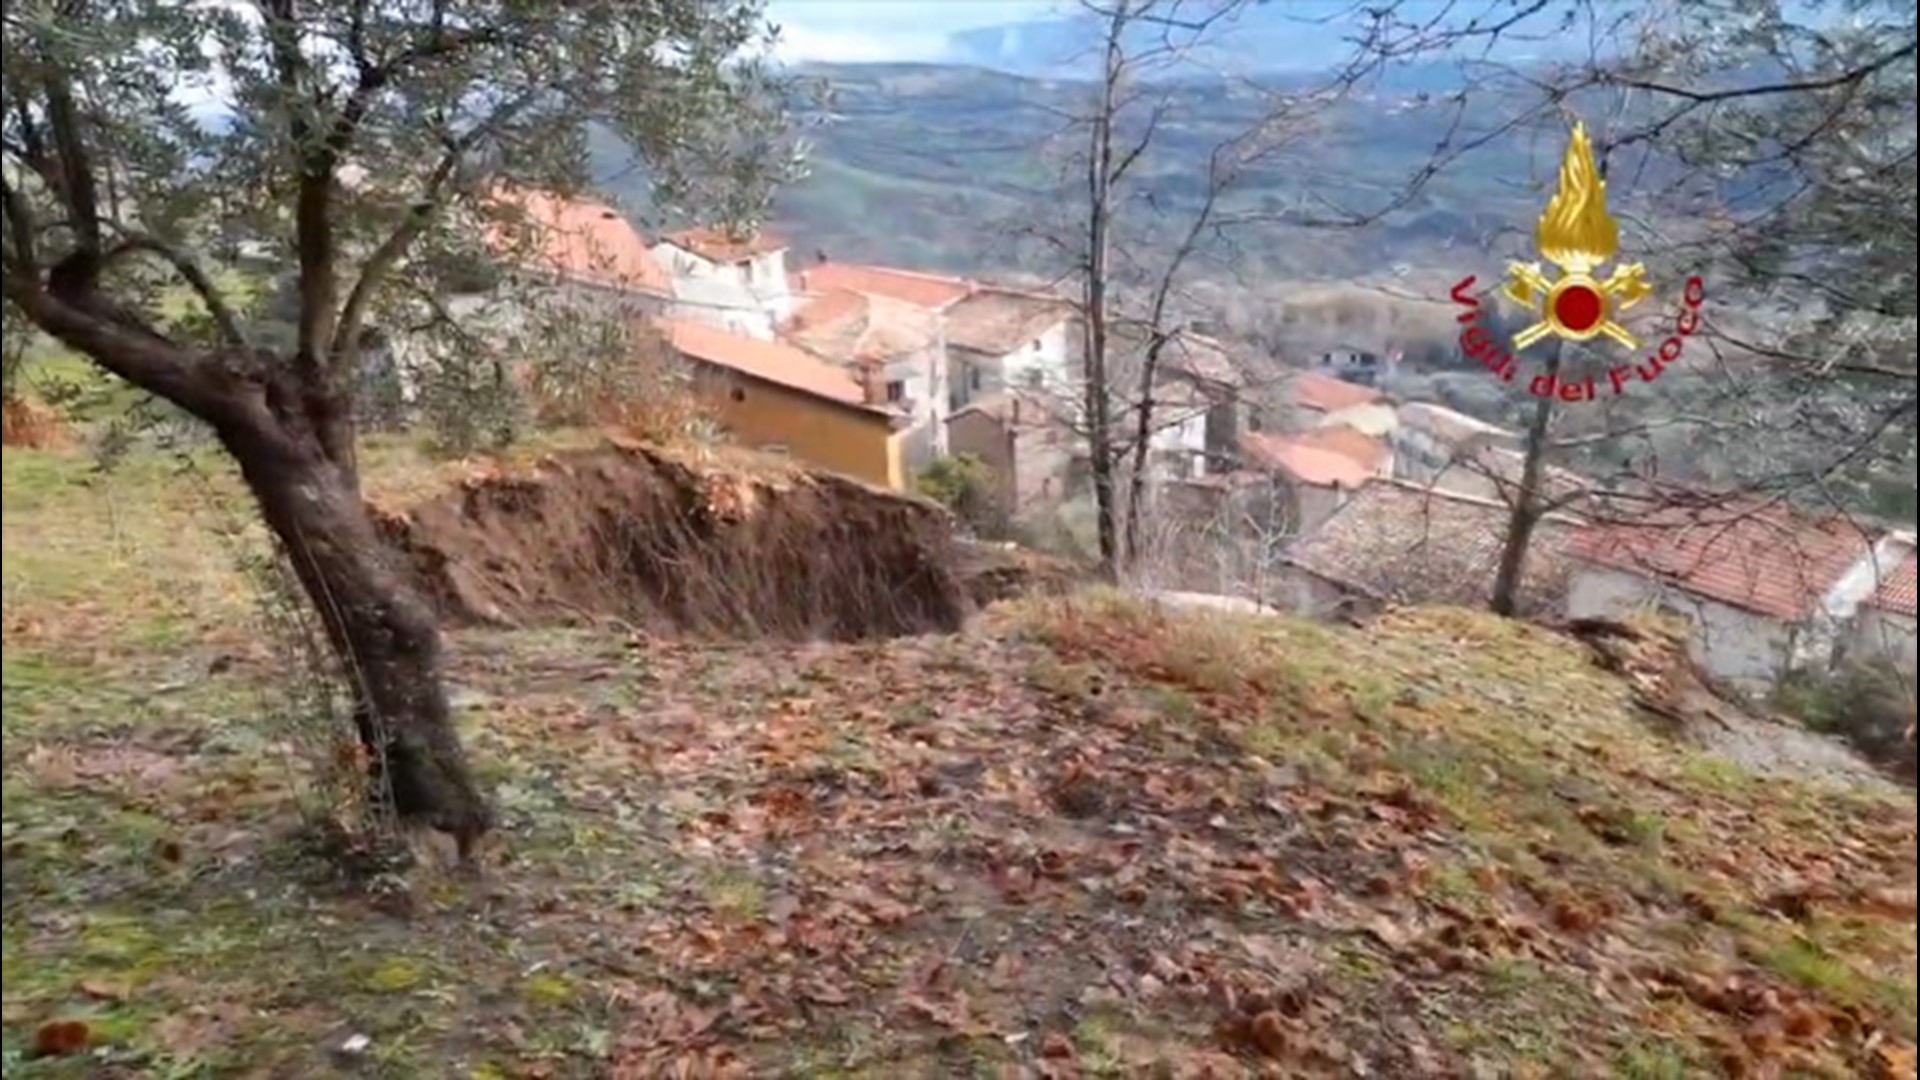 On Jan. 26, a mudslide damaged at least three buildings in the southern Italian town of Rota Greca, forcing fire crews to evacuate residents.